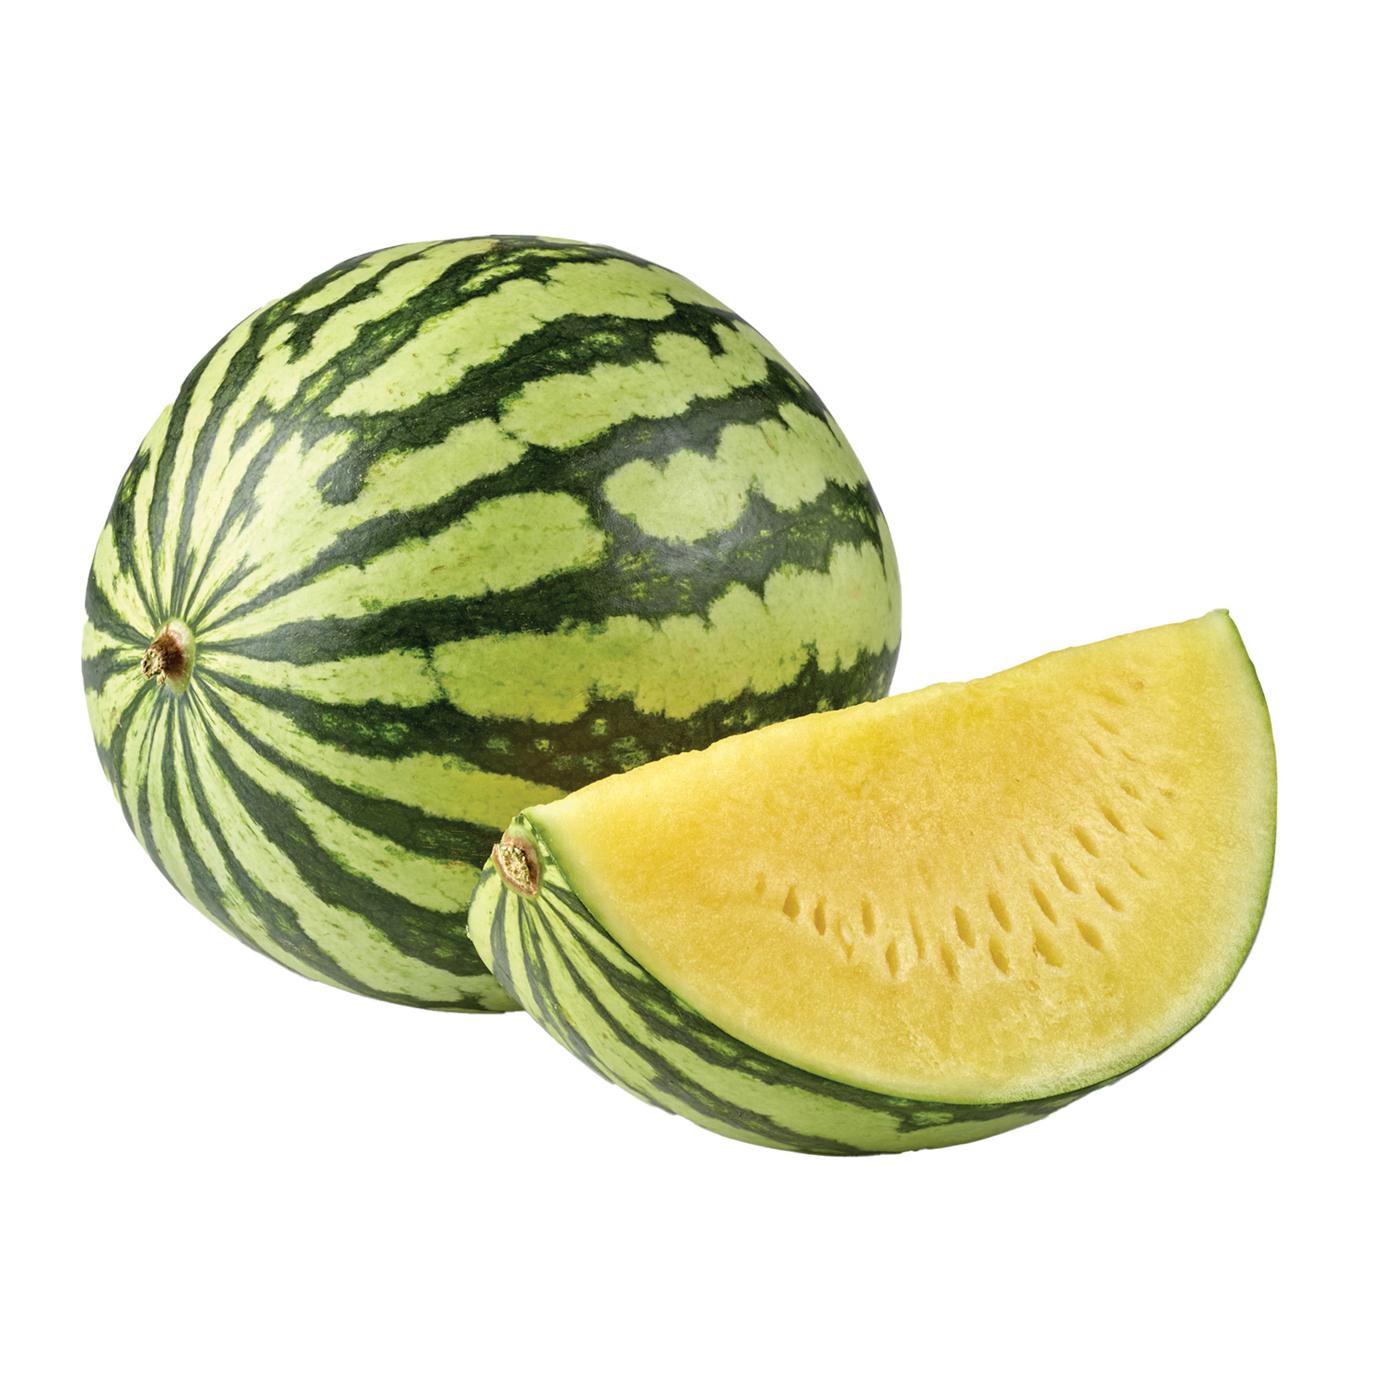 What Is A Yellow Watermelon?